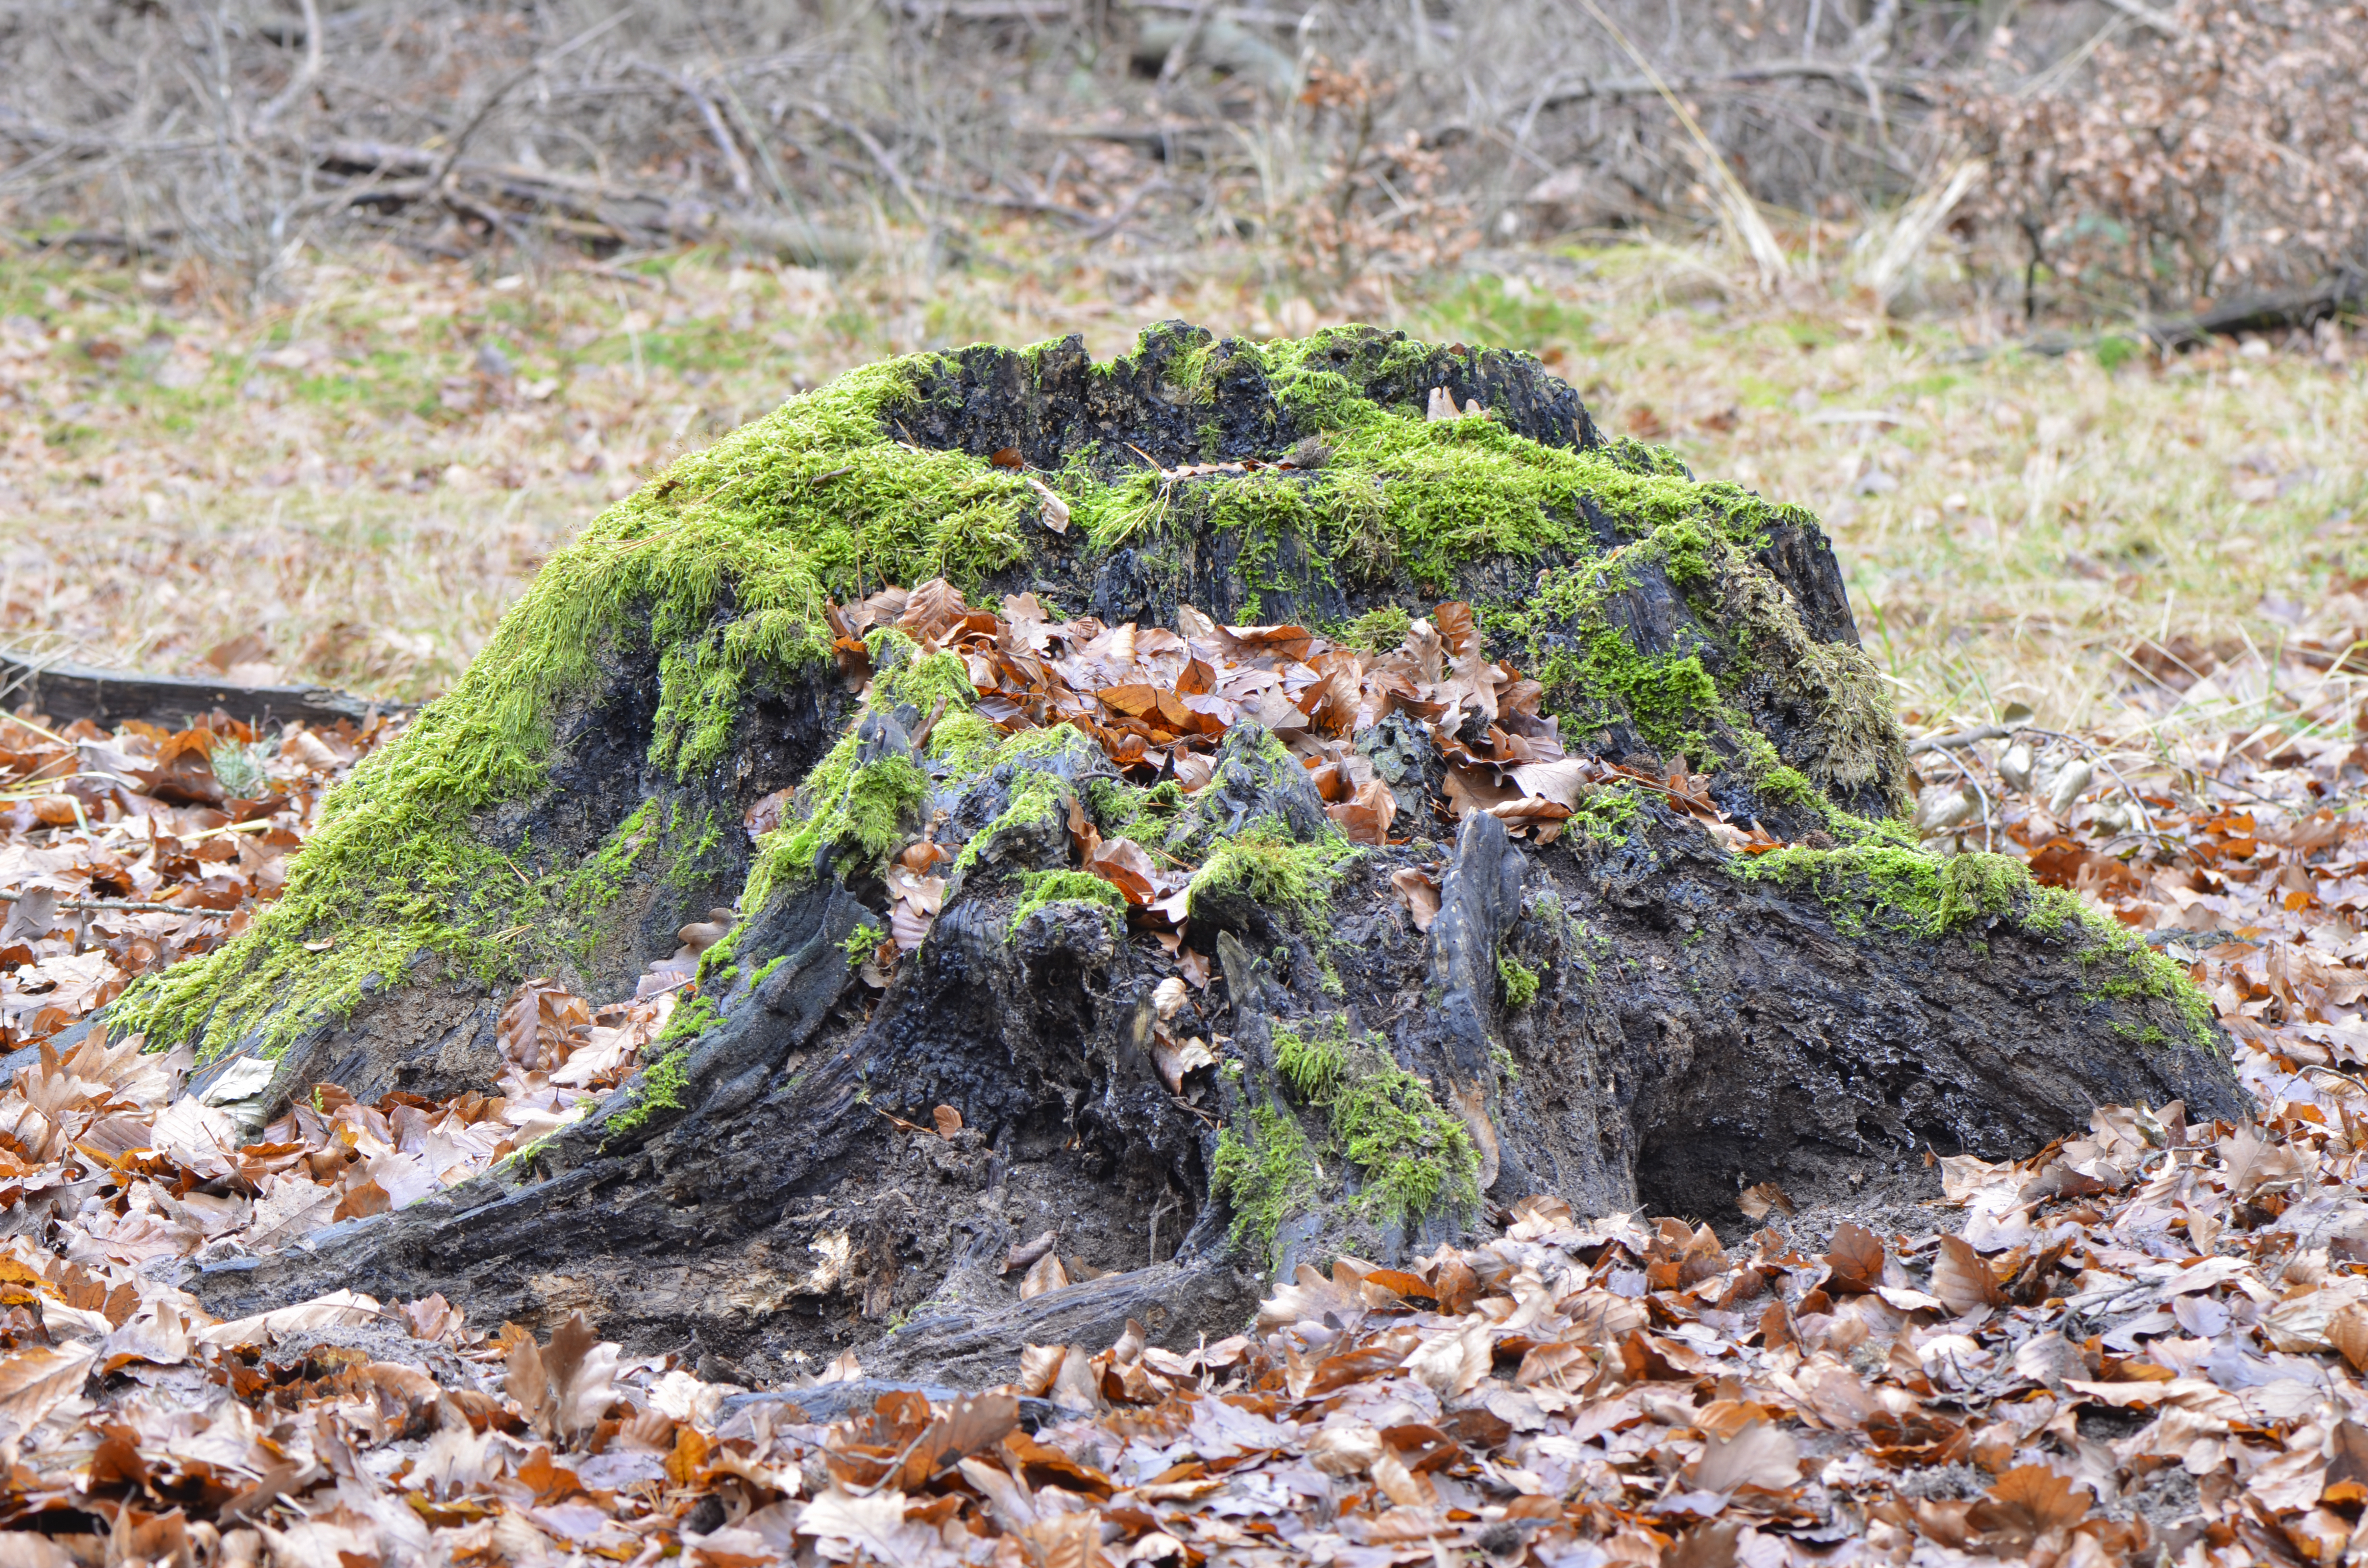 File:Rotten stumb covered with moss and leaves - verfallener ...